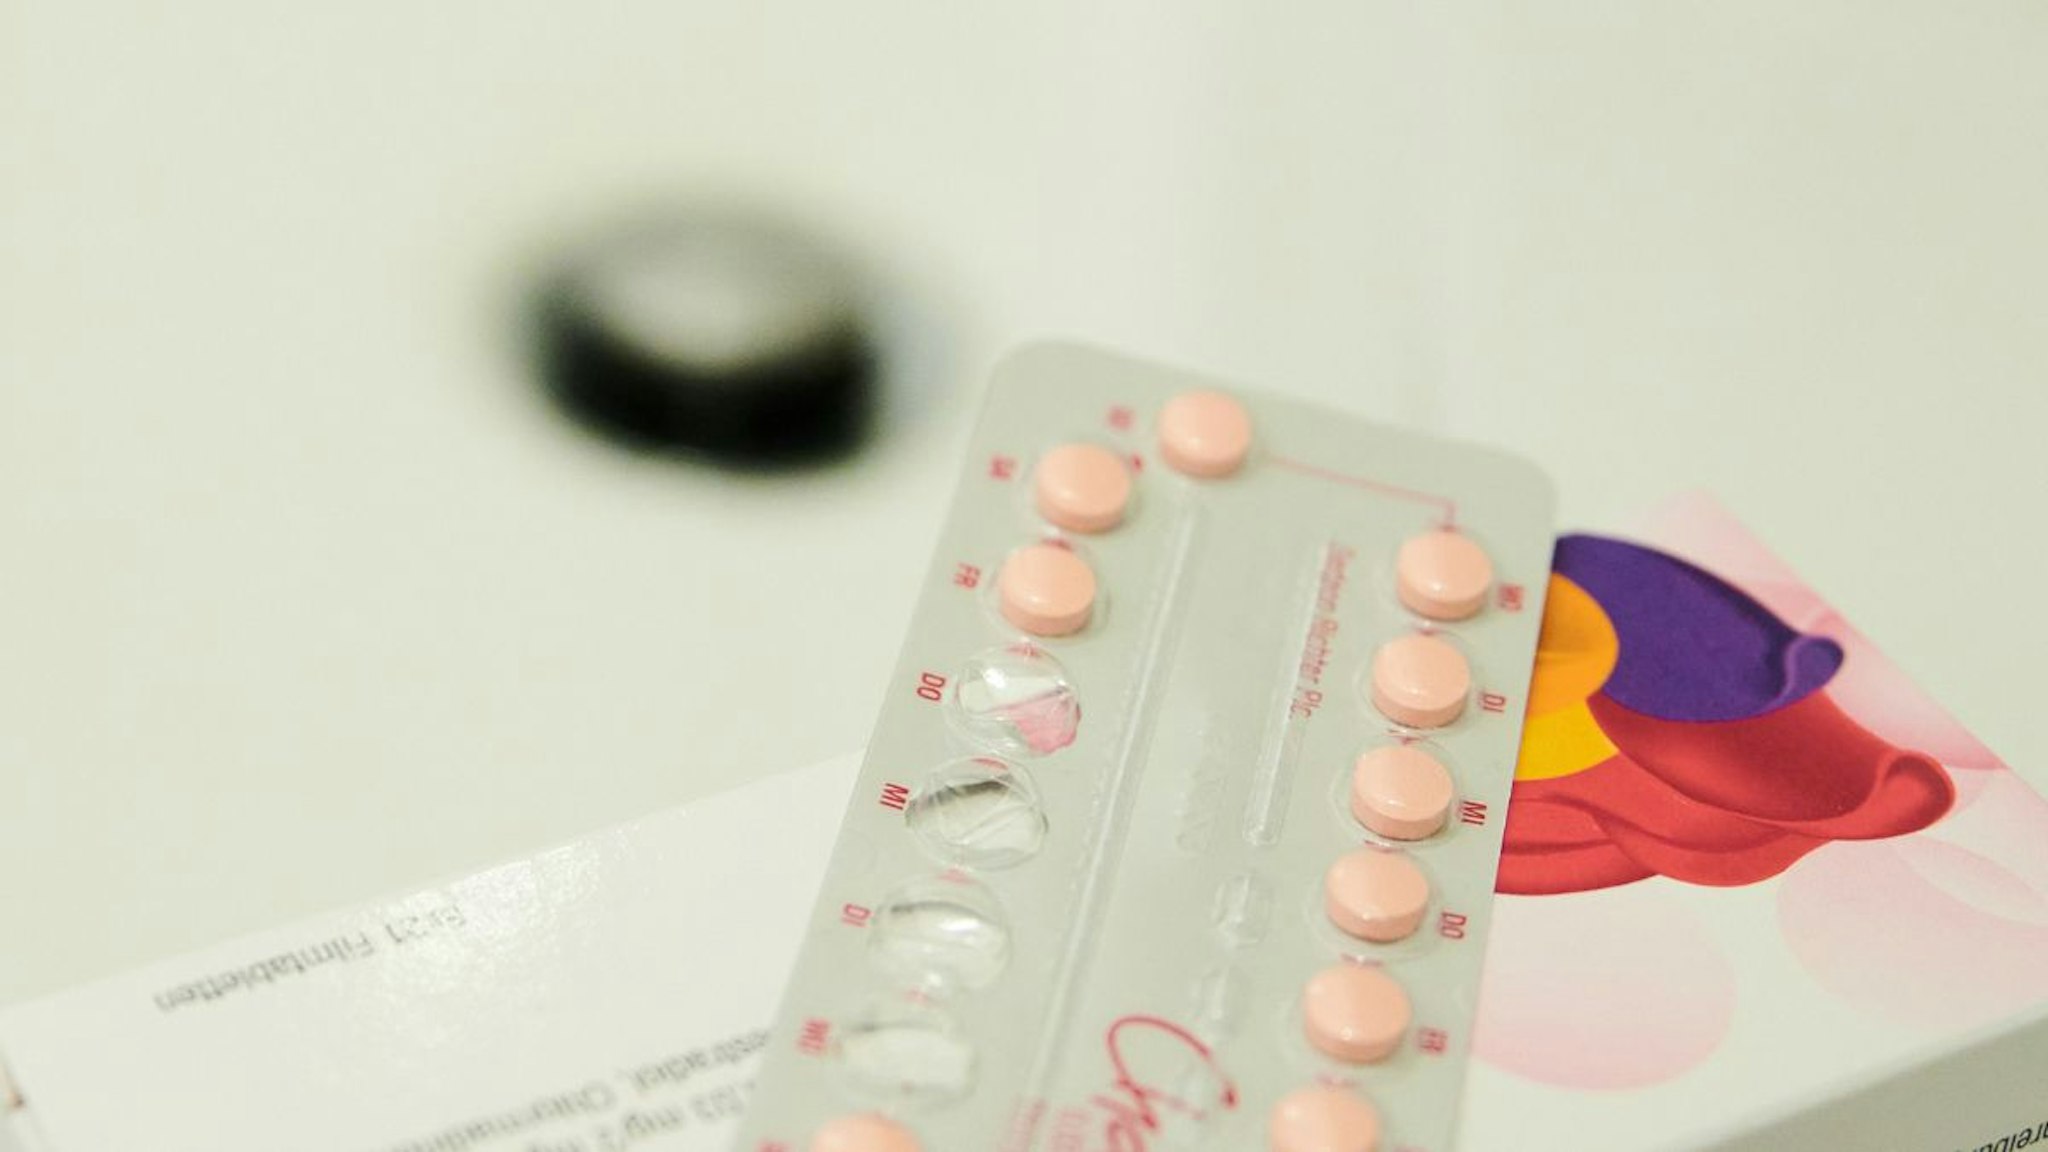 A partially opened monthly pack of the contraceptive pill lies on a sink.